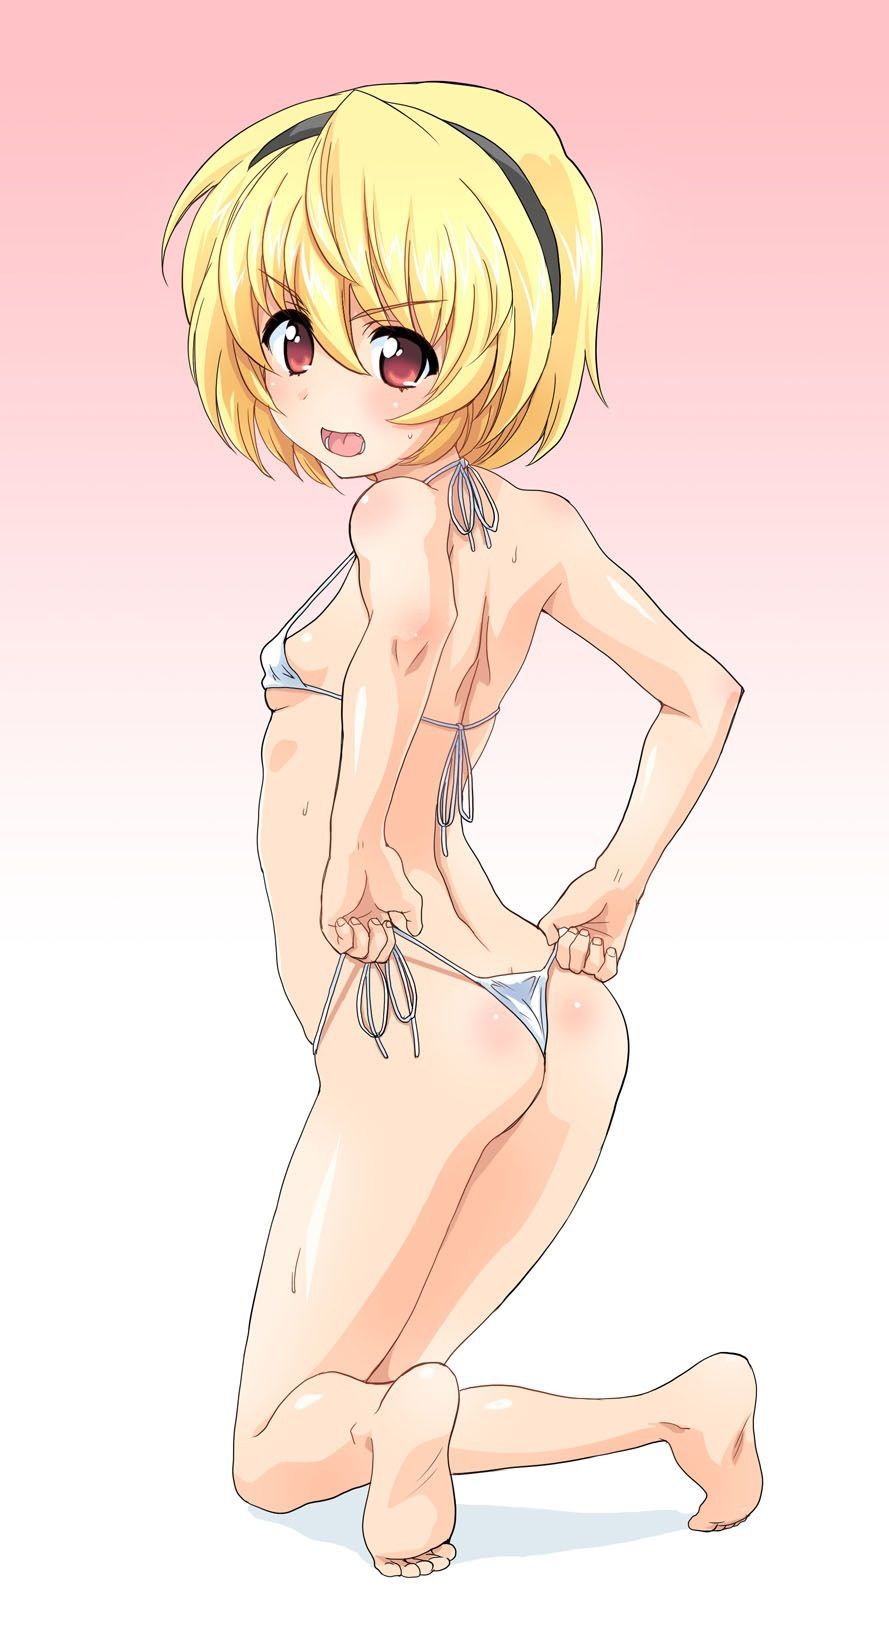 [Erotica character material] PNG background transmission erotic image such as anime character Part 314 47